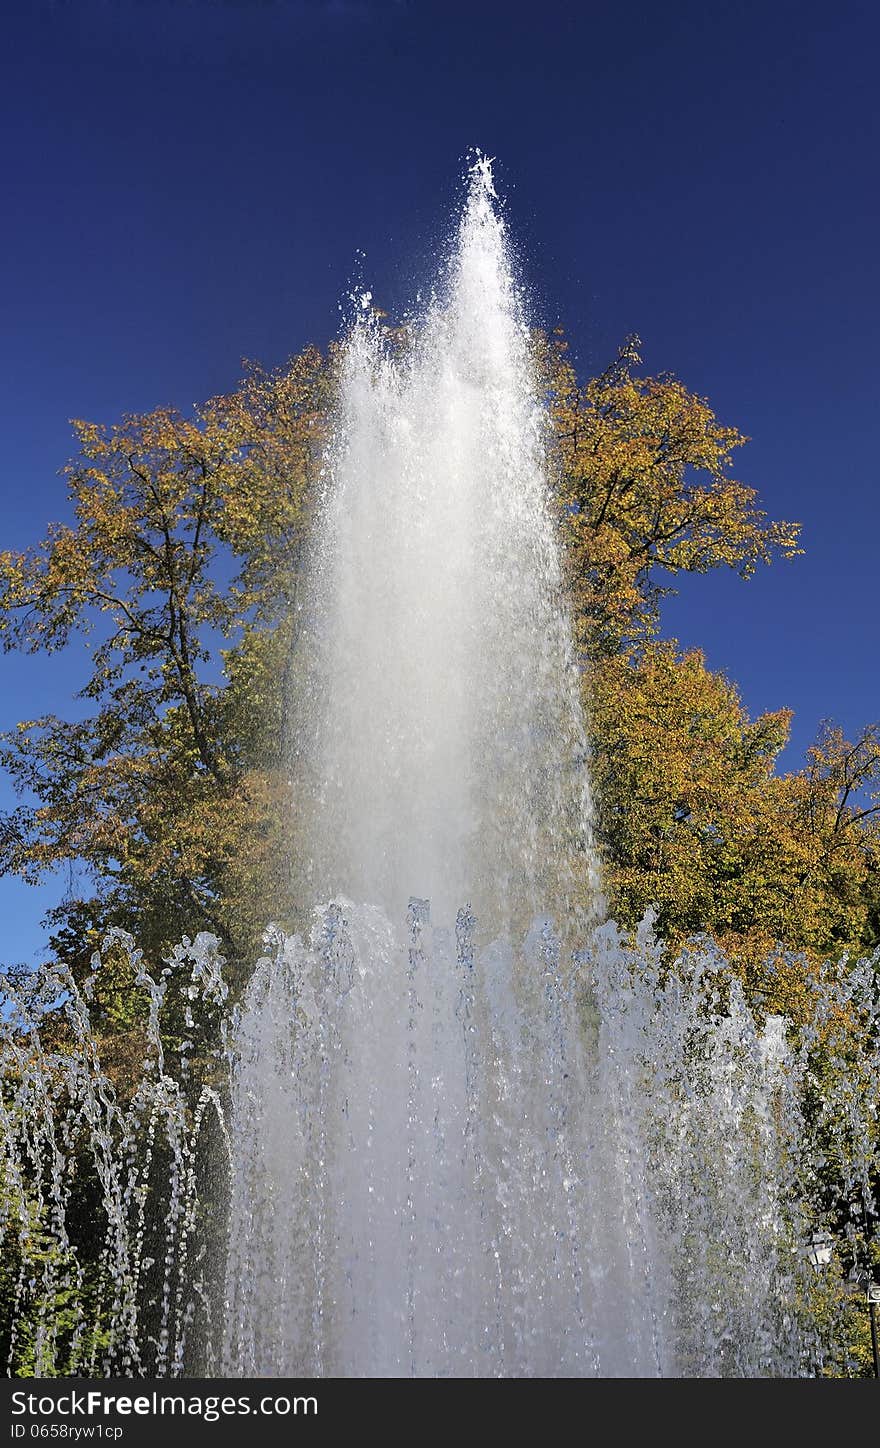 Splashes of fountain water in a sunny day